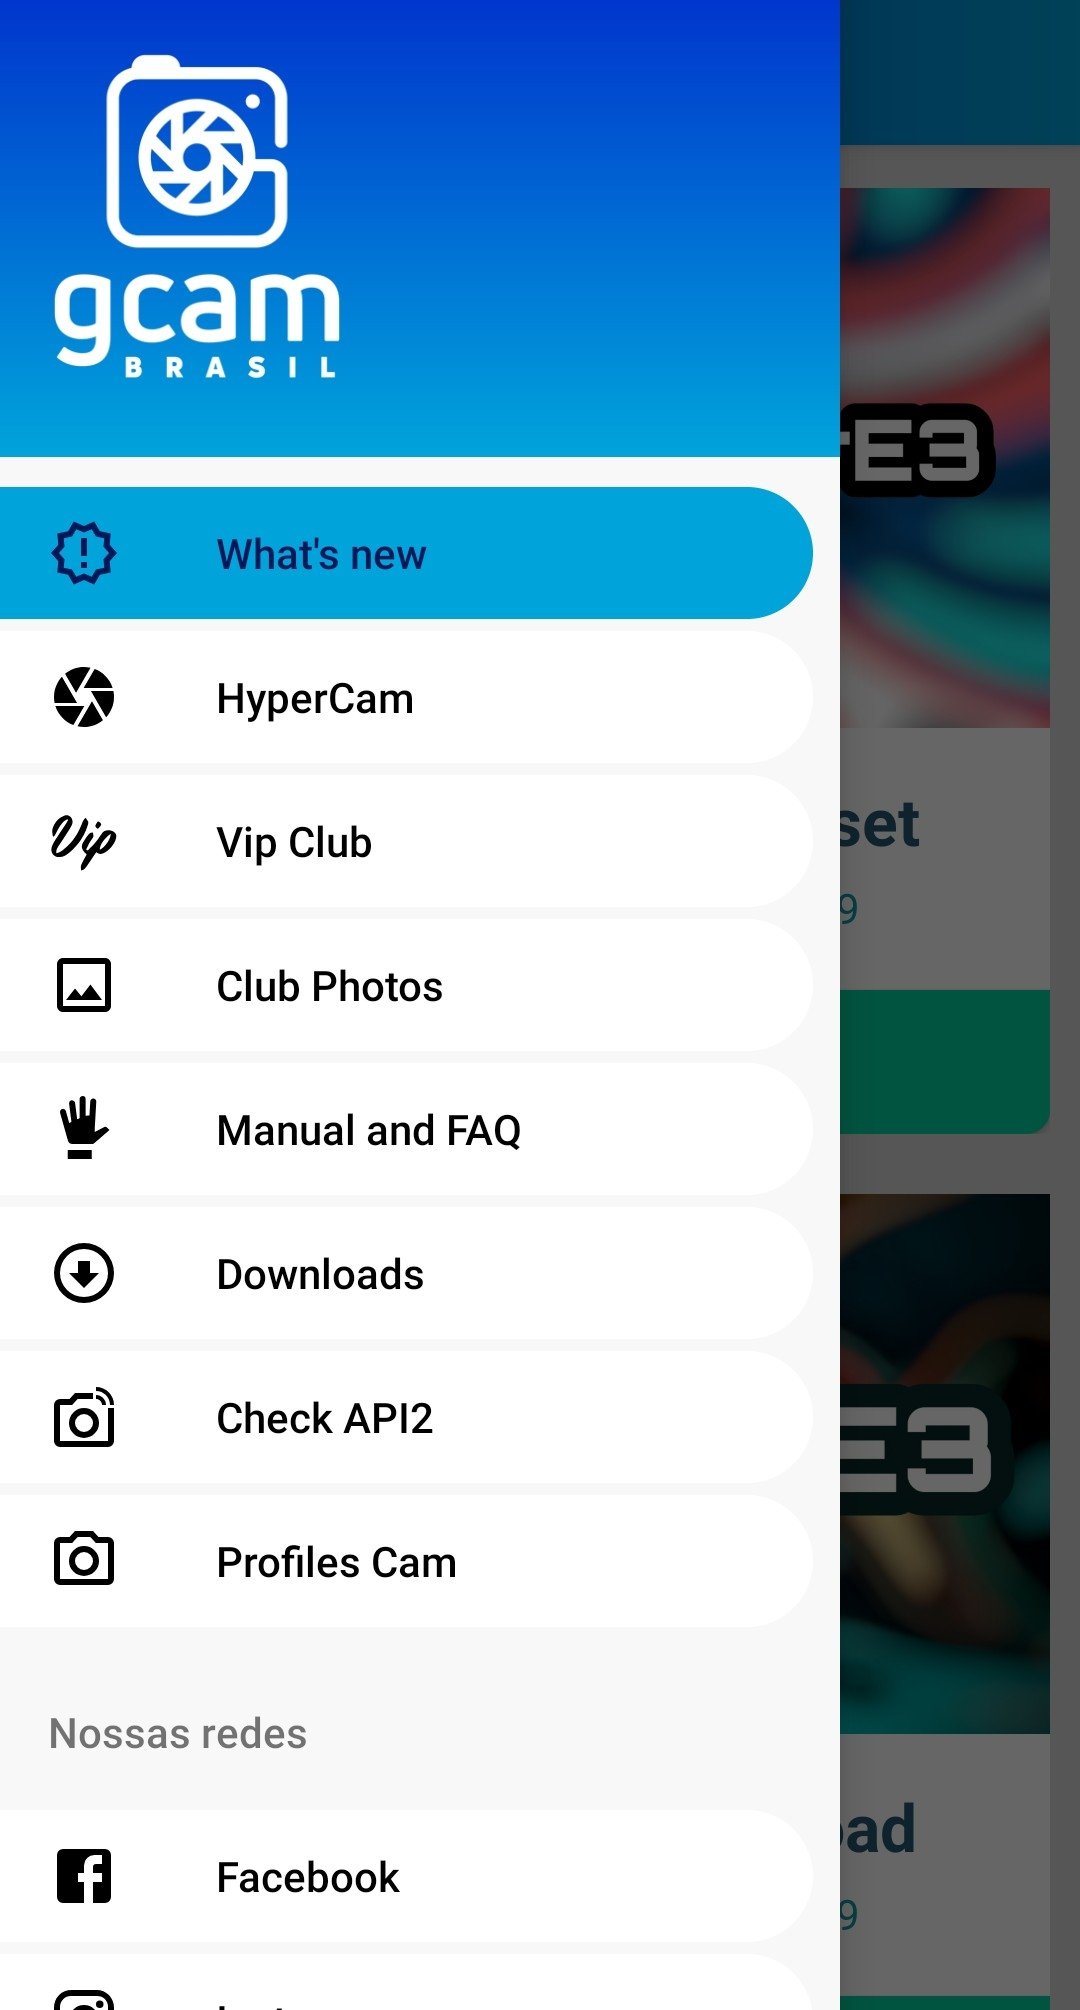 Clube GBMix 4.0.69 APKs - br.com.idever.fidelidade.gbmix APK Download